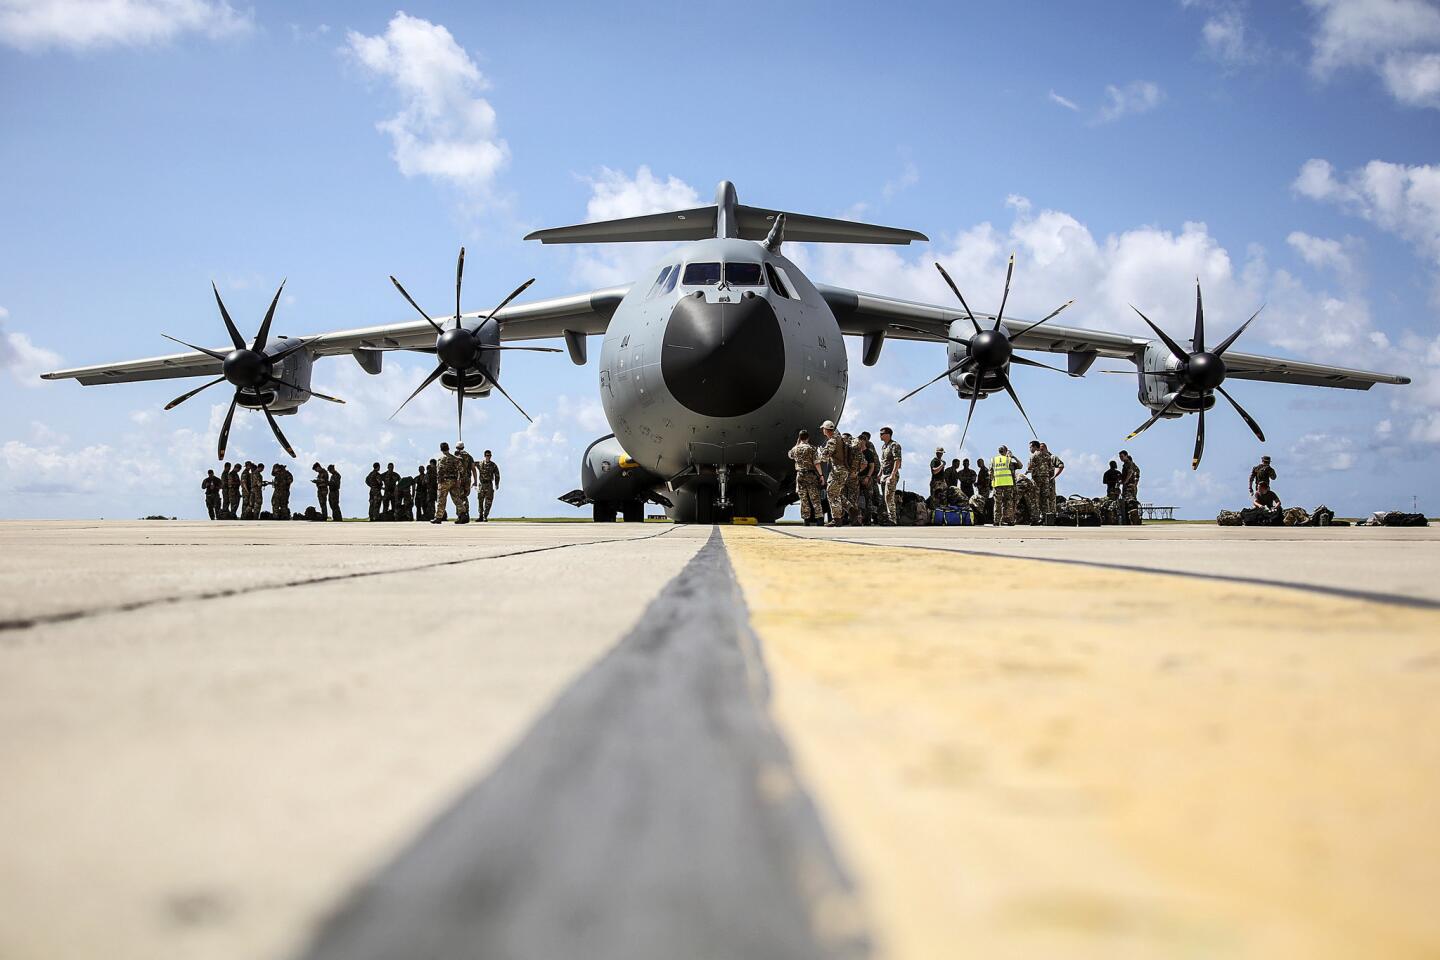 A handout picture released by the British Ministry of Defence (MOD) on Sept. 10, 2017, shows Royal Marine Commandos from 40 Commando preparing to board an RAF A400M in Barbados on Sept. 9, 2017, to fly to the British Virgin Islands to provide disaster relief after Hurricane Irma.